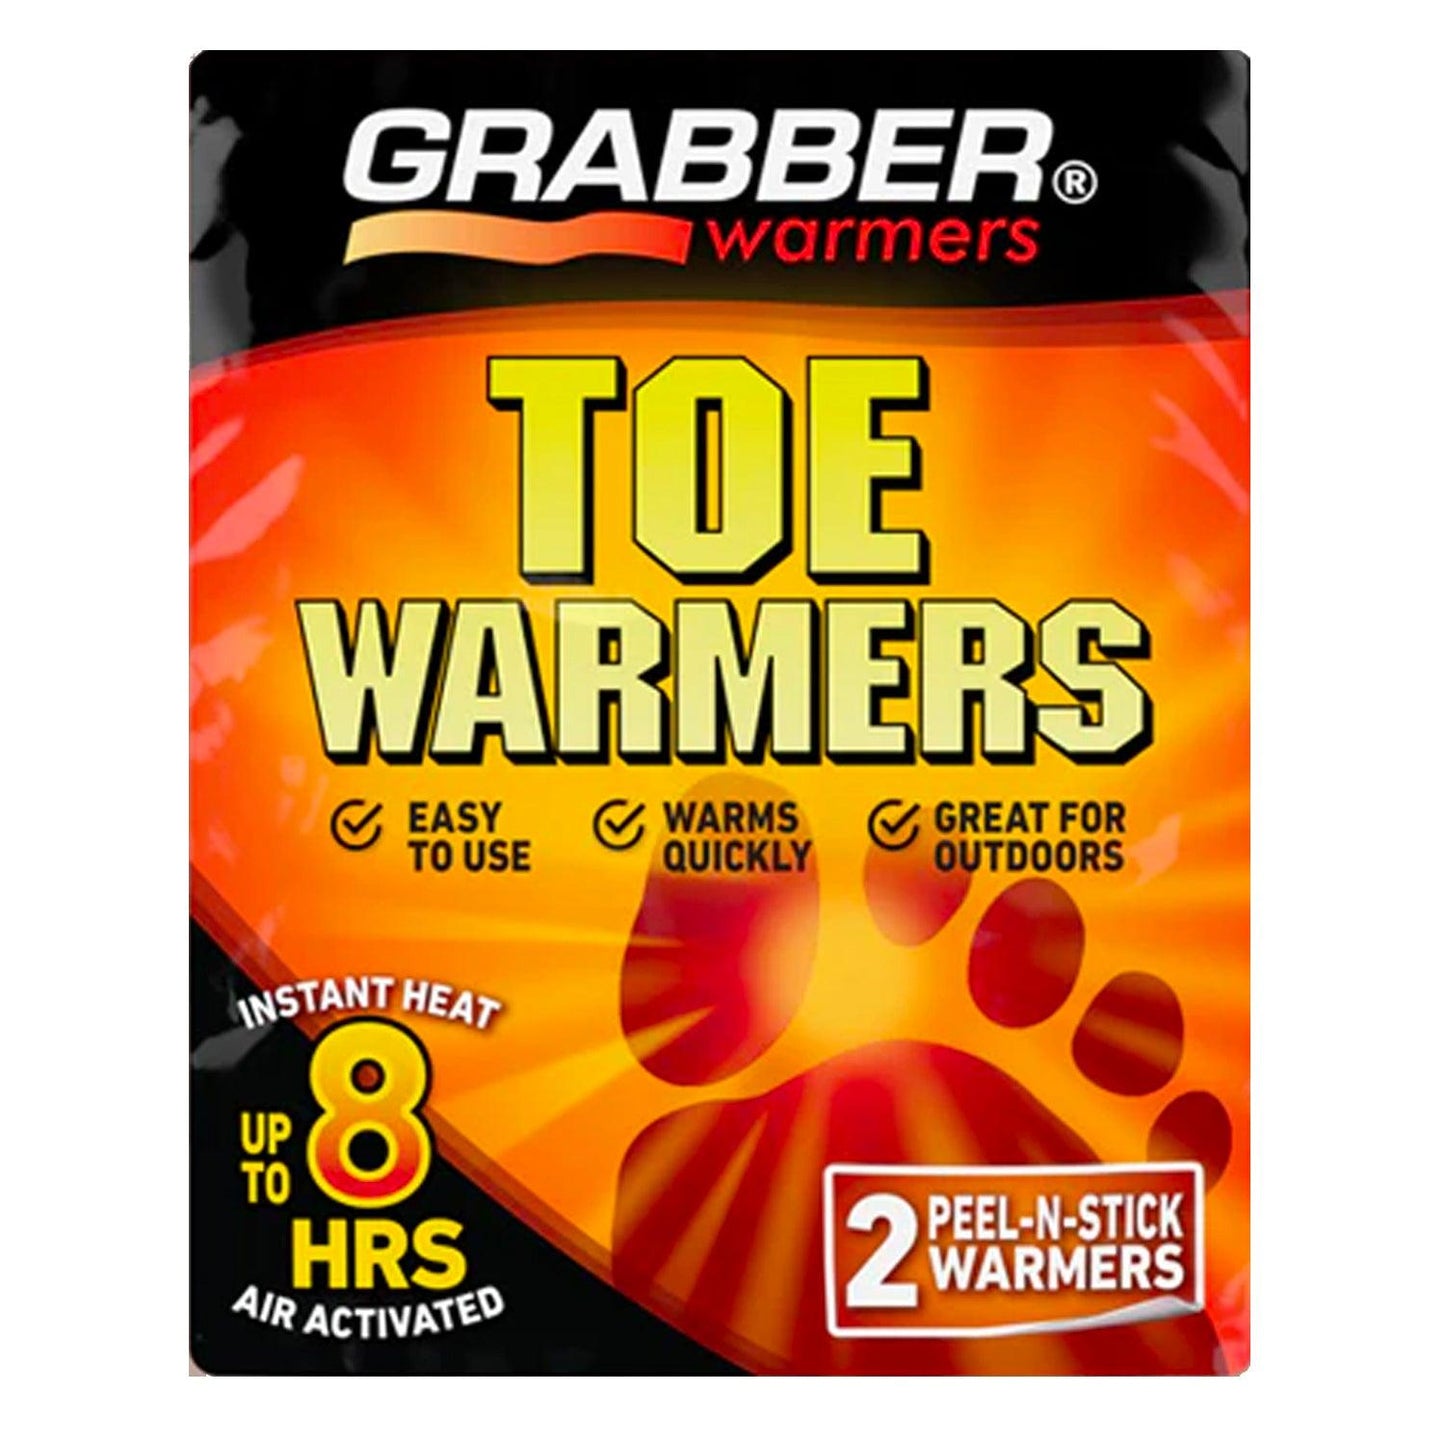 Grabber Toe Warmers - Long Lasting Safe Natural Odorless Air Activated Warmers - Up to 8 Hours of Heat - 40 Pair Box